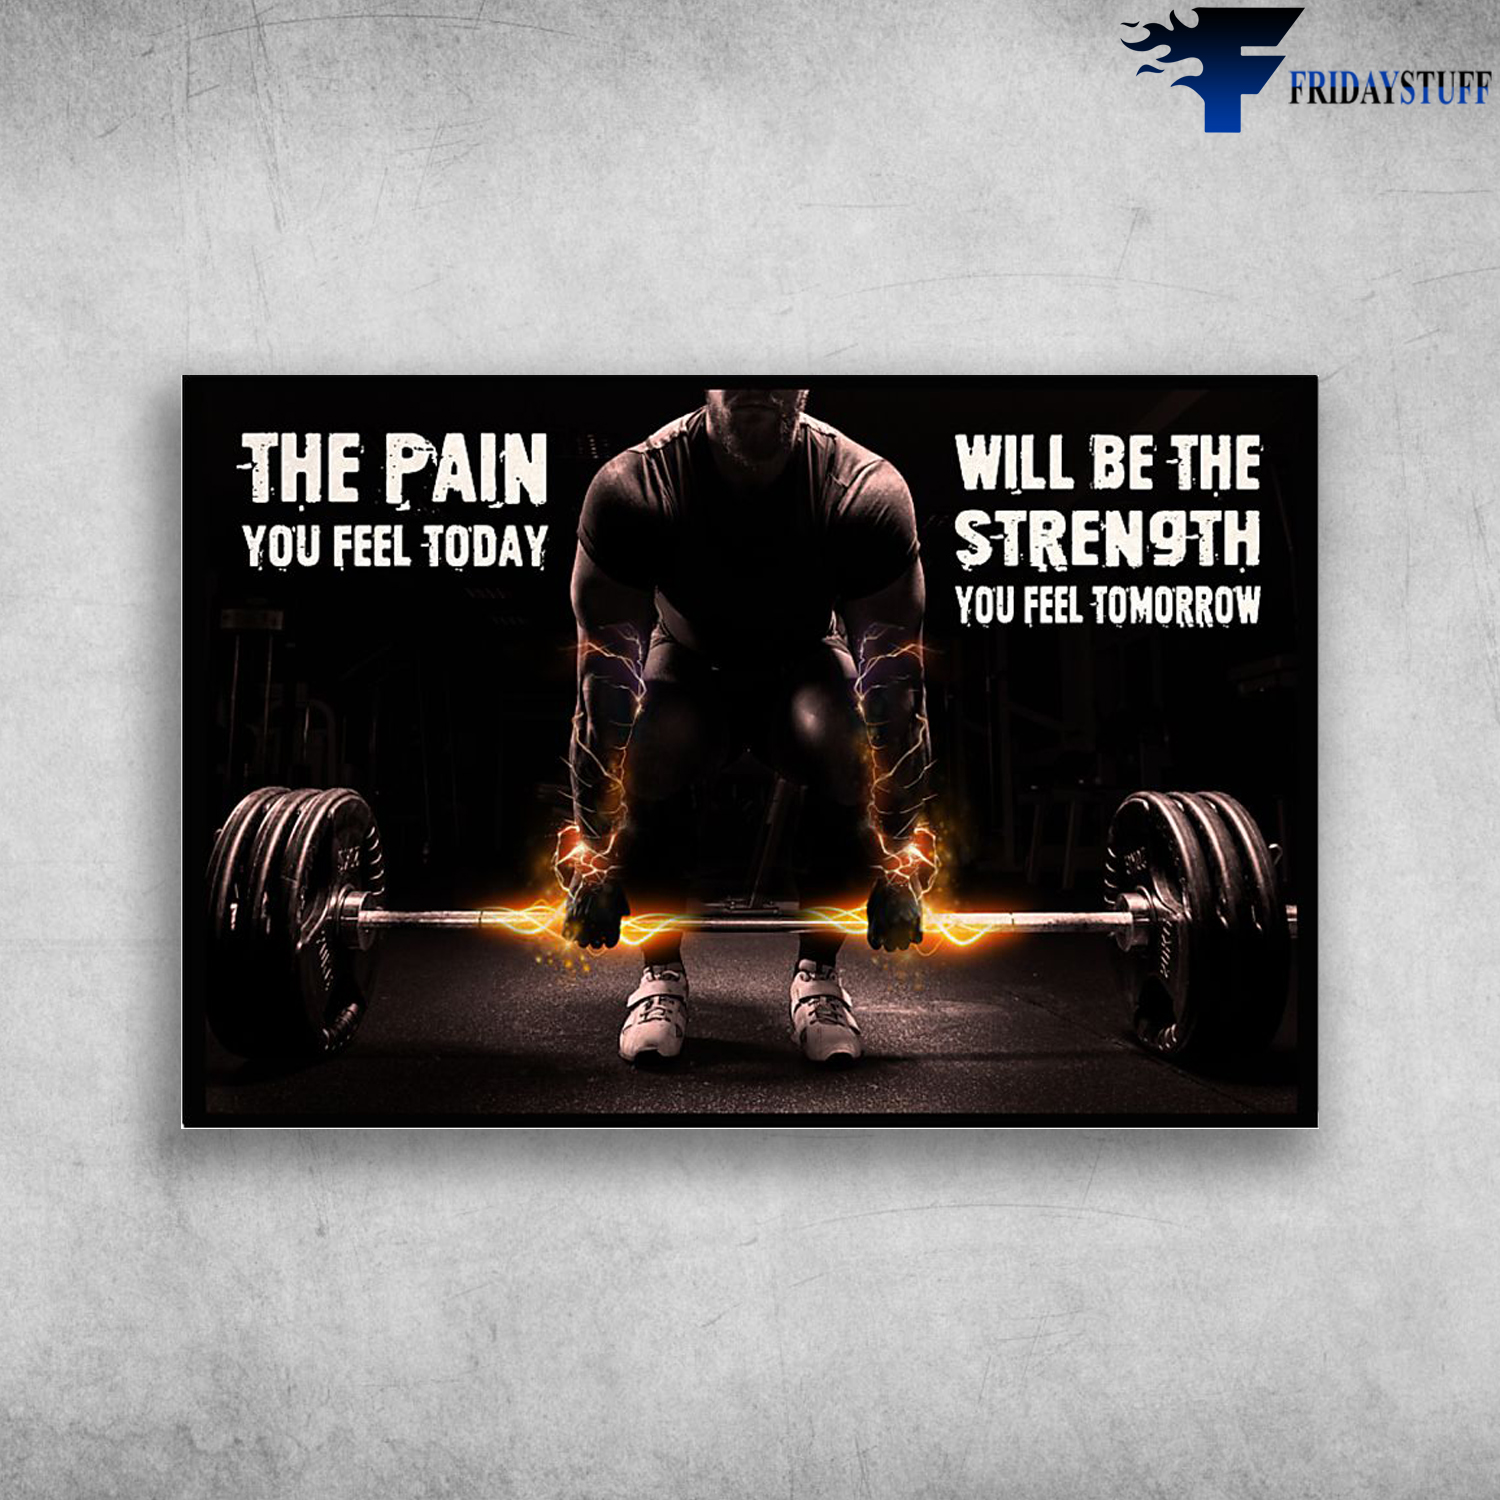 Weightlifting Man - The Pain You Feel Today, Will Be The Strength You Feel Tomorrow